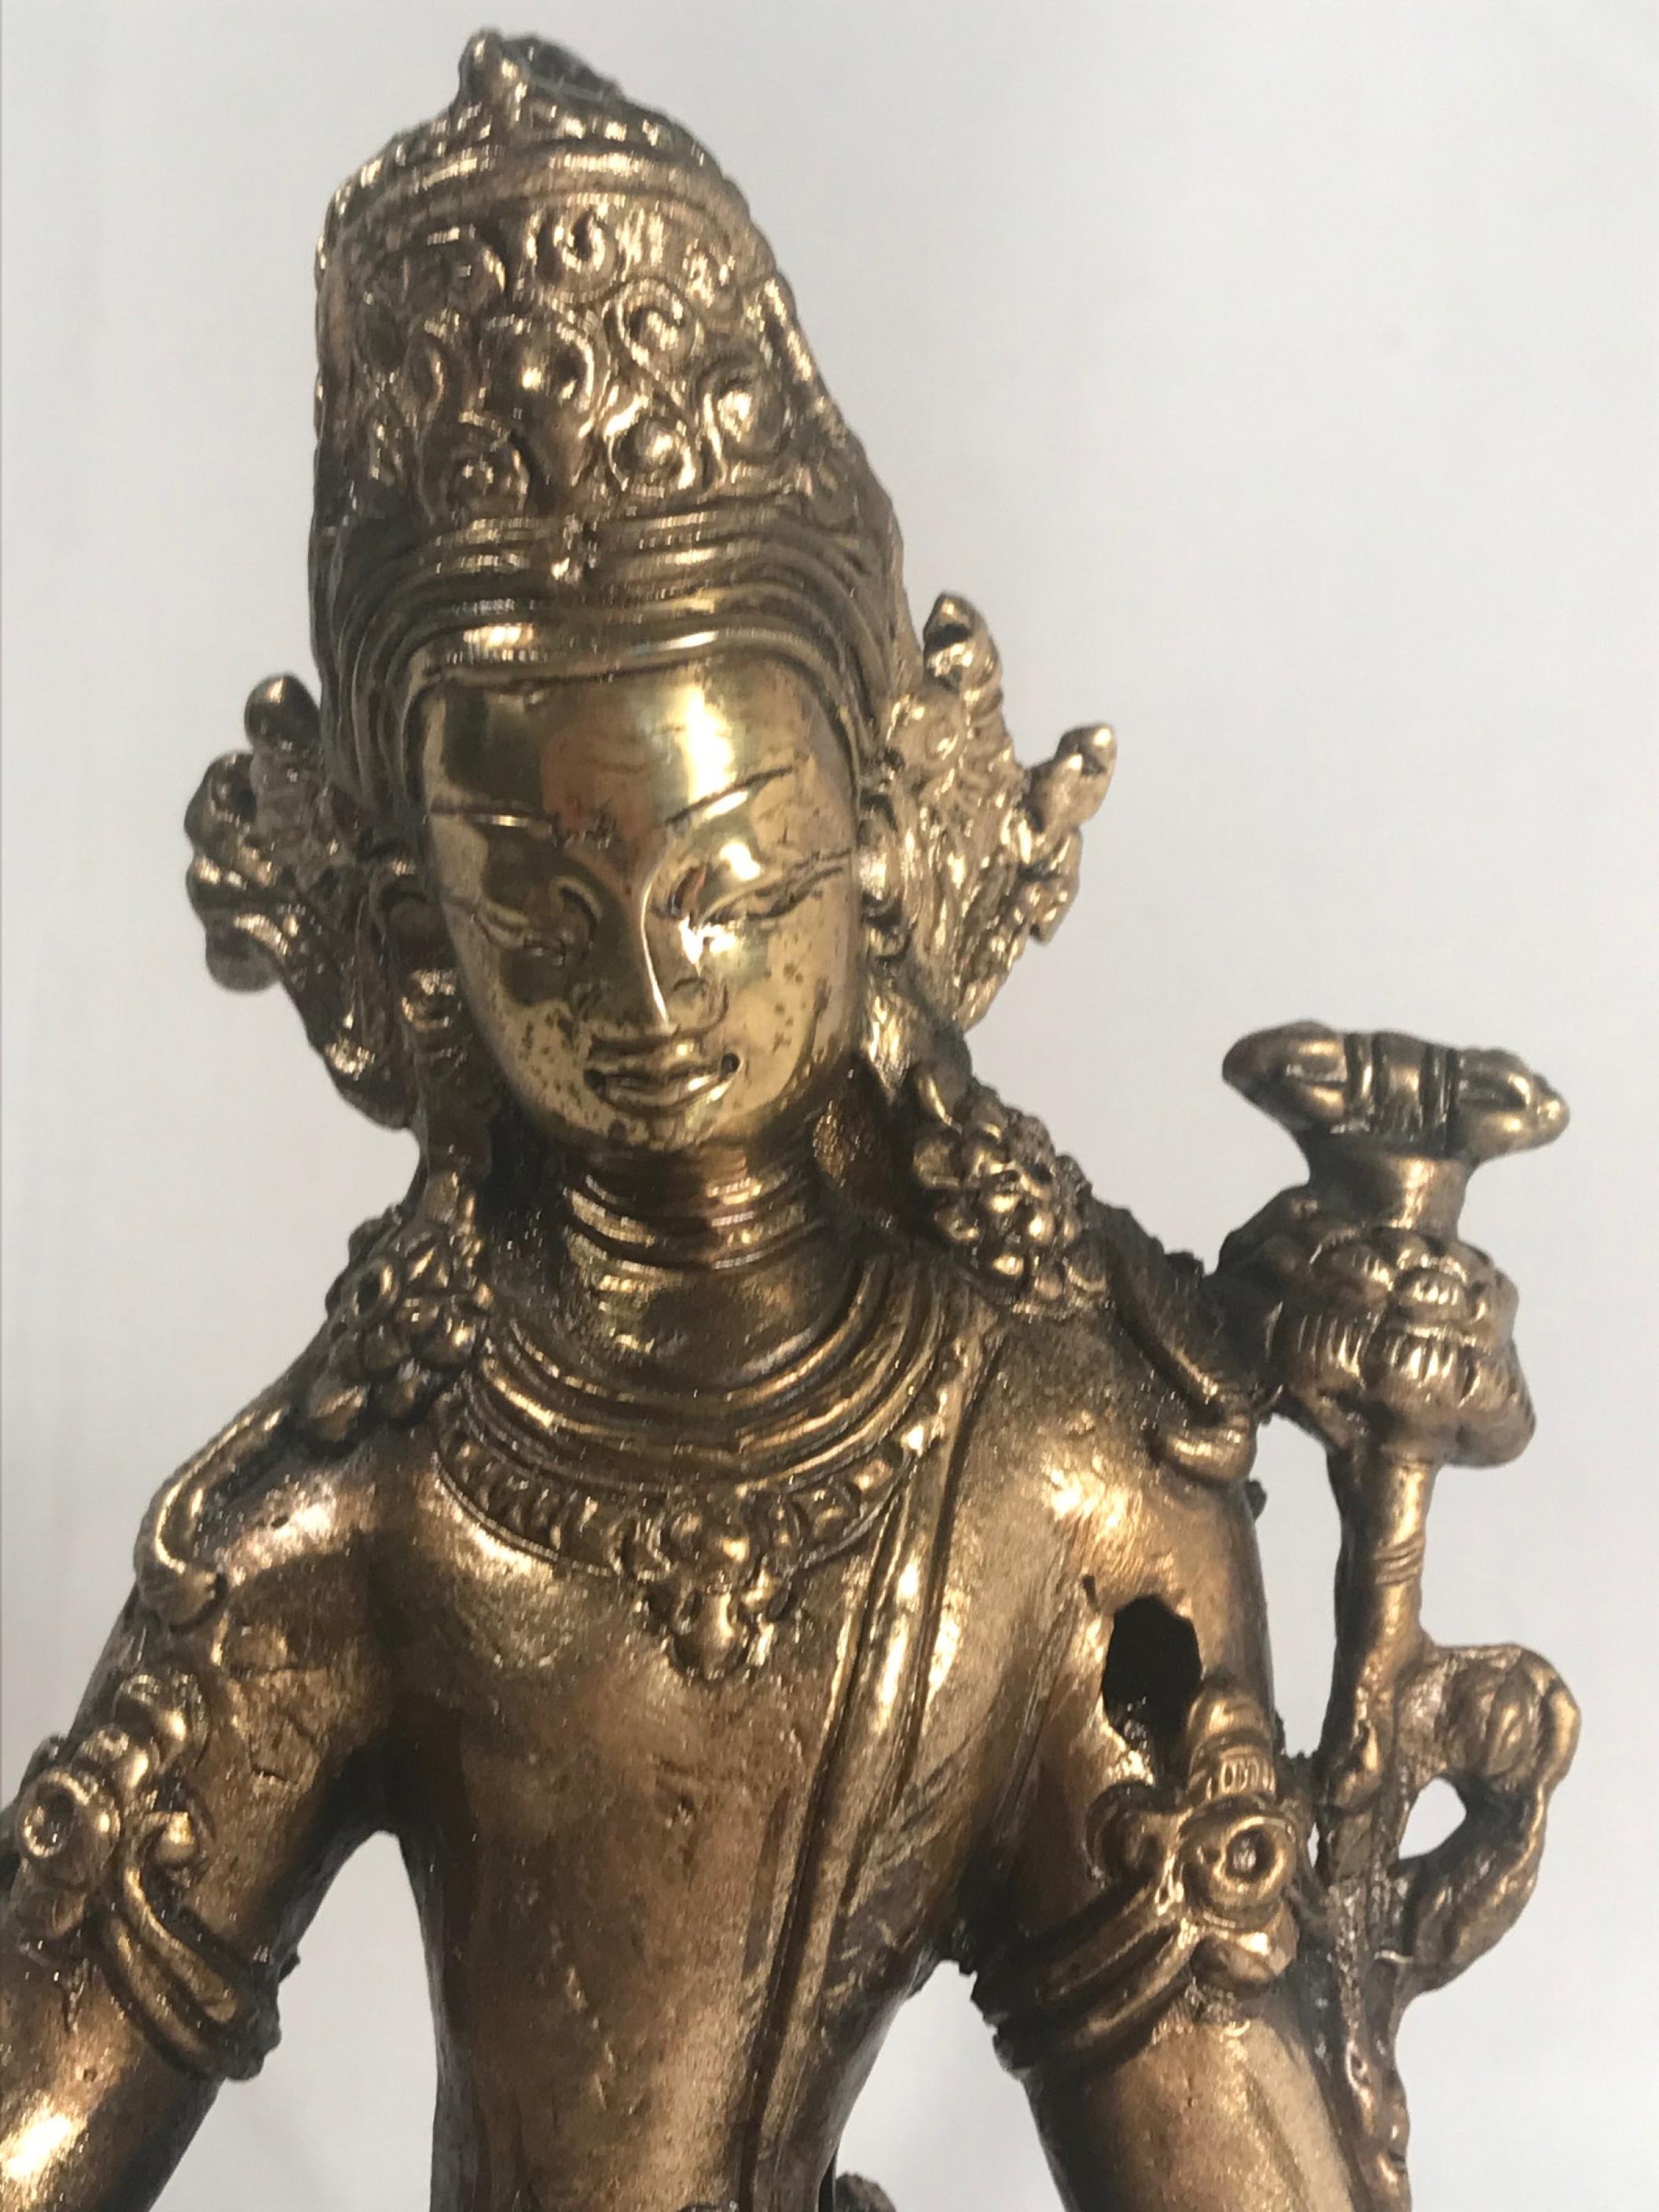 19th century gold gilded bronze Buddha

A finely cast bronze Buddha statue in gold gilt with modeled and incised floral motifs. This jeweled God of Wealth Buddha is seated in lalitasana posture on a lotus with right foot supported on a conch shell.